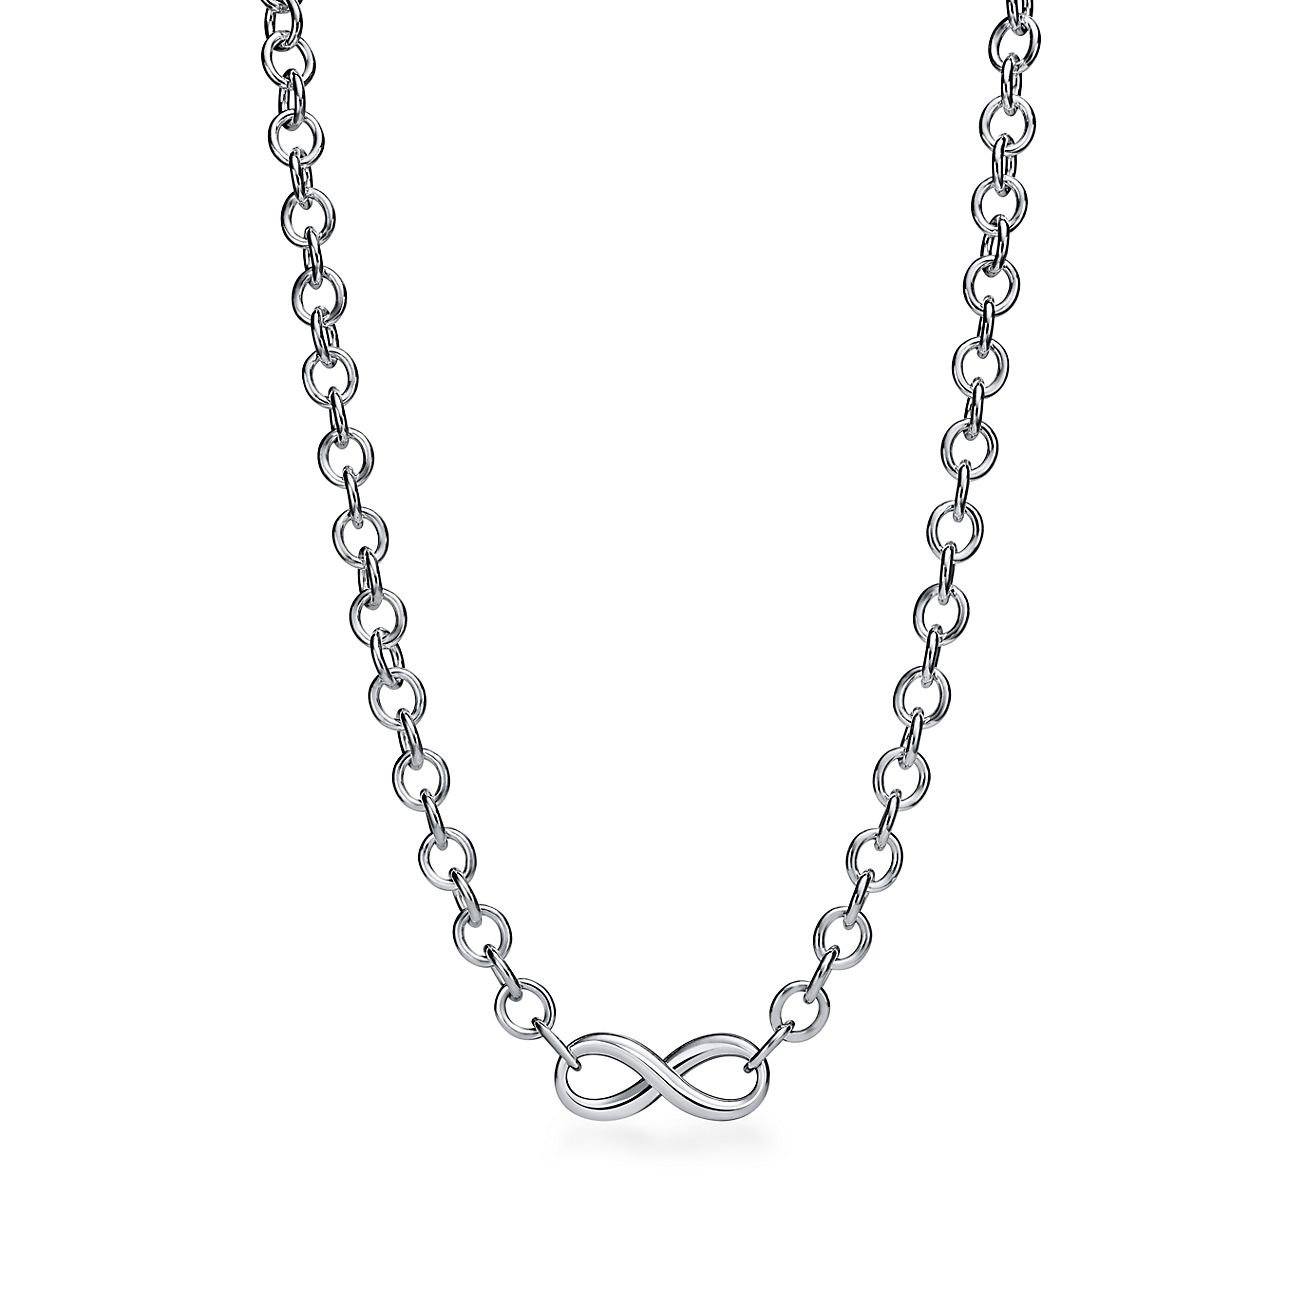 T&CO.® horseshoe charm in sterling silver on a chain. | Tiffany & Co.